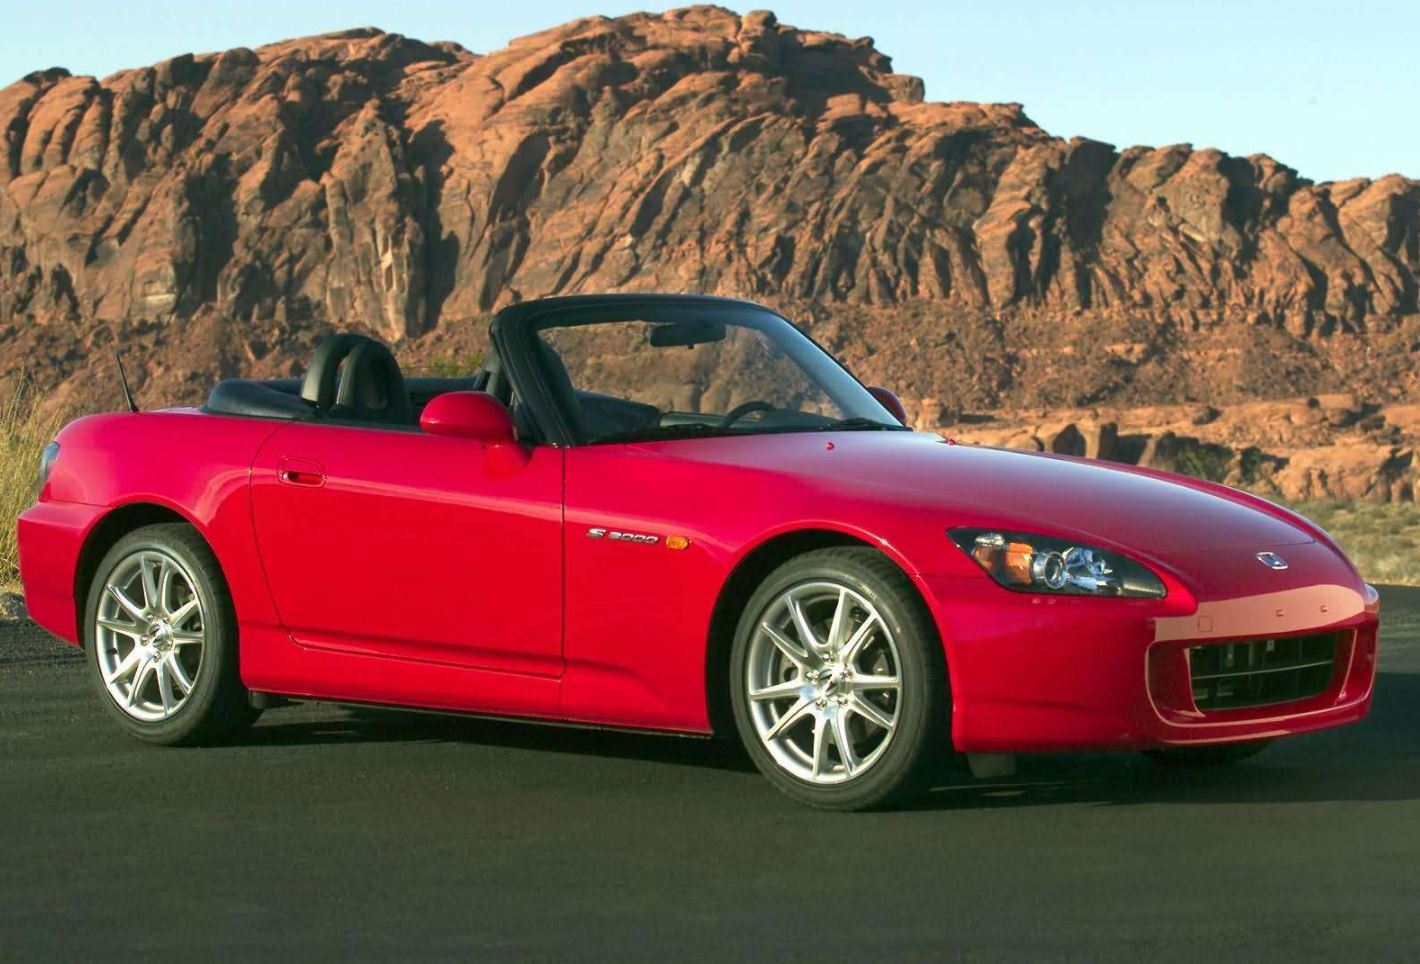 How Much Did The Honda S2000 Cost New Garage Dreams